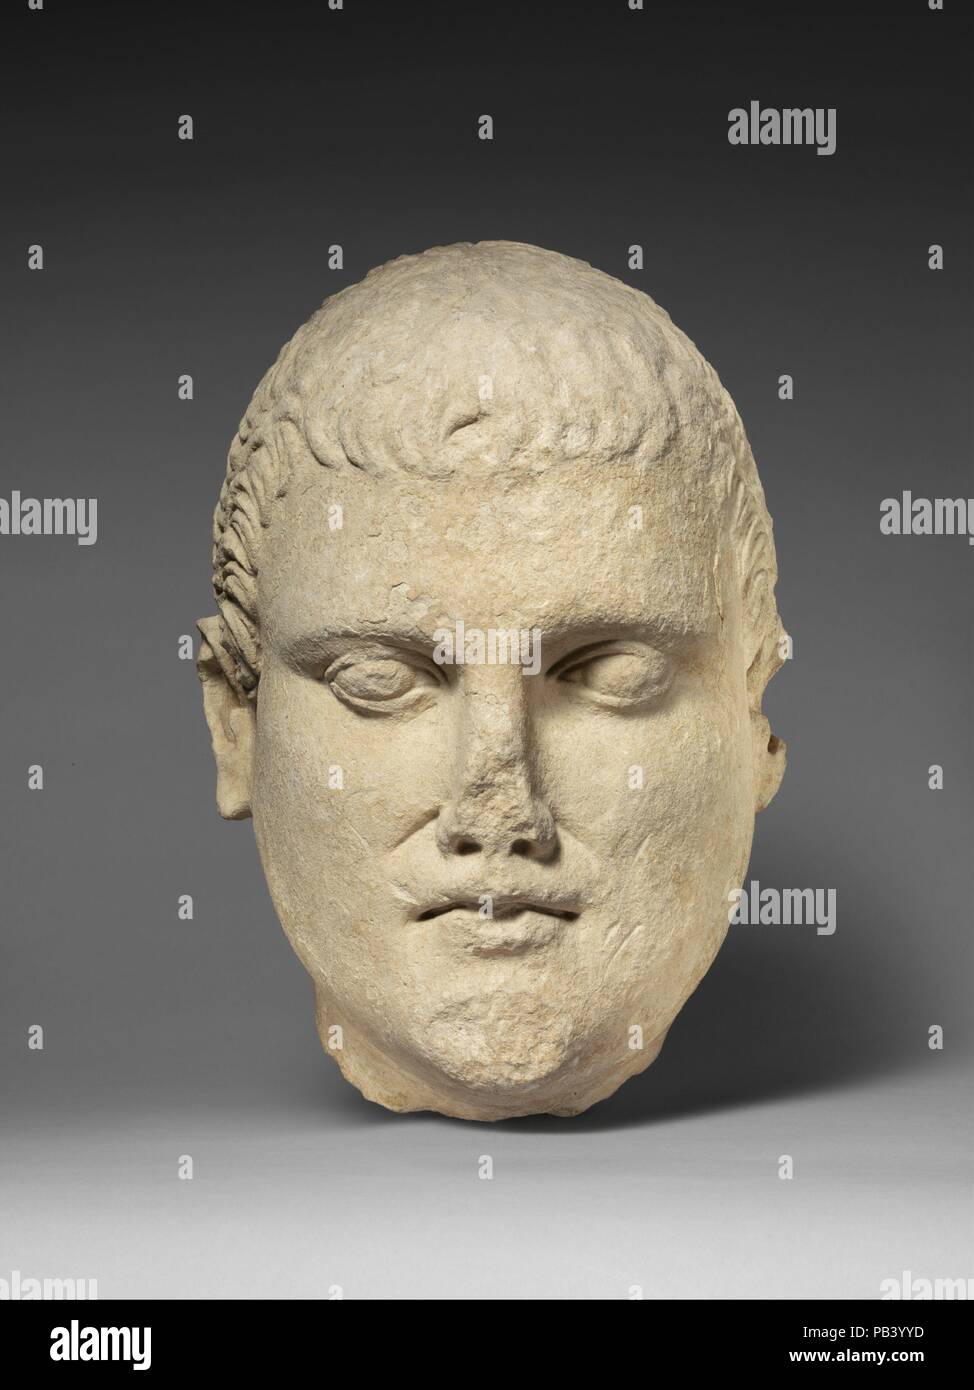 Limestone head of beardless male votary. Culture: Cypriot. Dimensions: 10 7/8 x 8 1/4 x 7 in.  (27.6 x 21 x 17.8 cm). Date: early 1st century B.C..  The lower portion of the face is heavy, the chin juts out. The half-open mouth has a severe expression. The small ears are carefully rendered. Museum: Metropolitan Museum of Art, New York, USA. Stock Photo